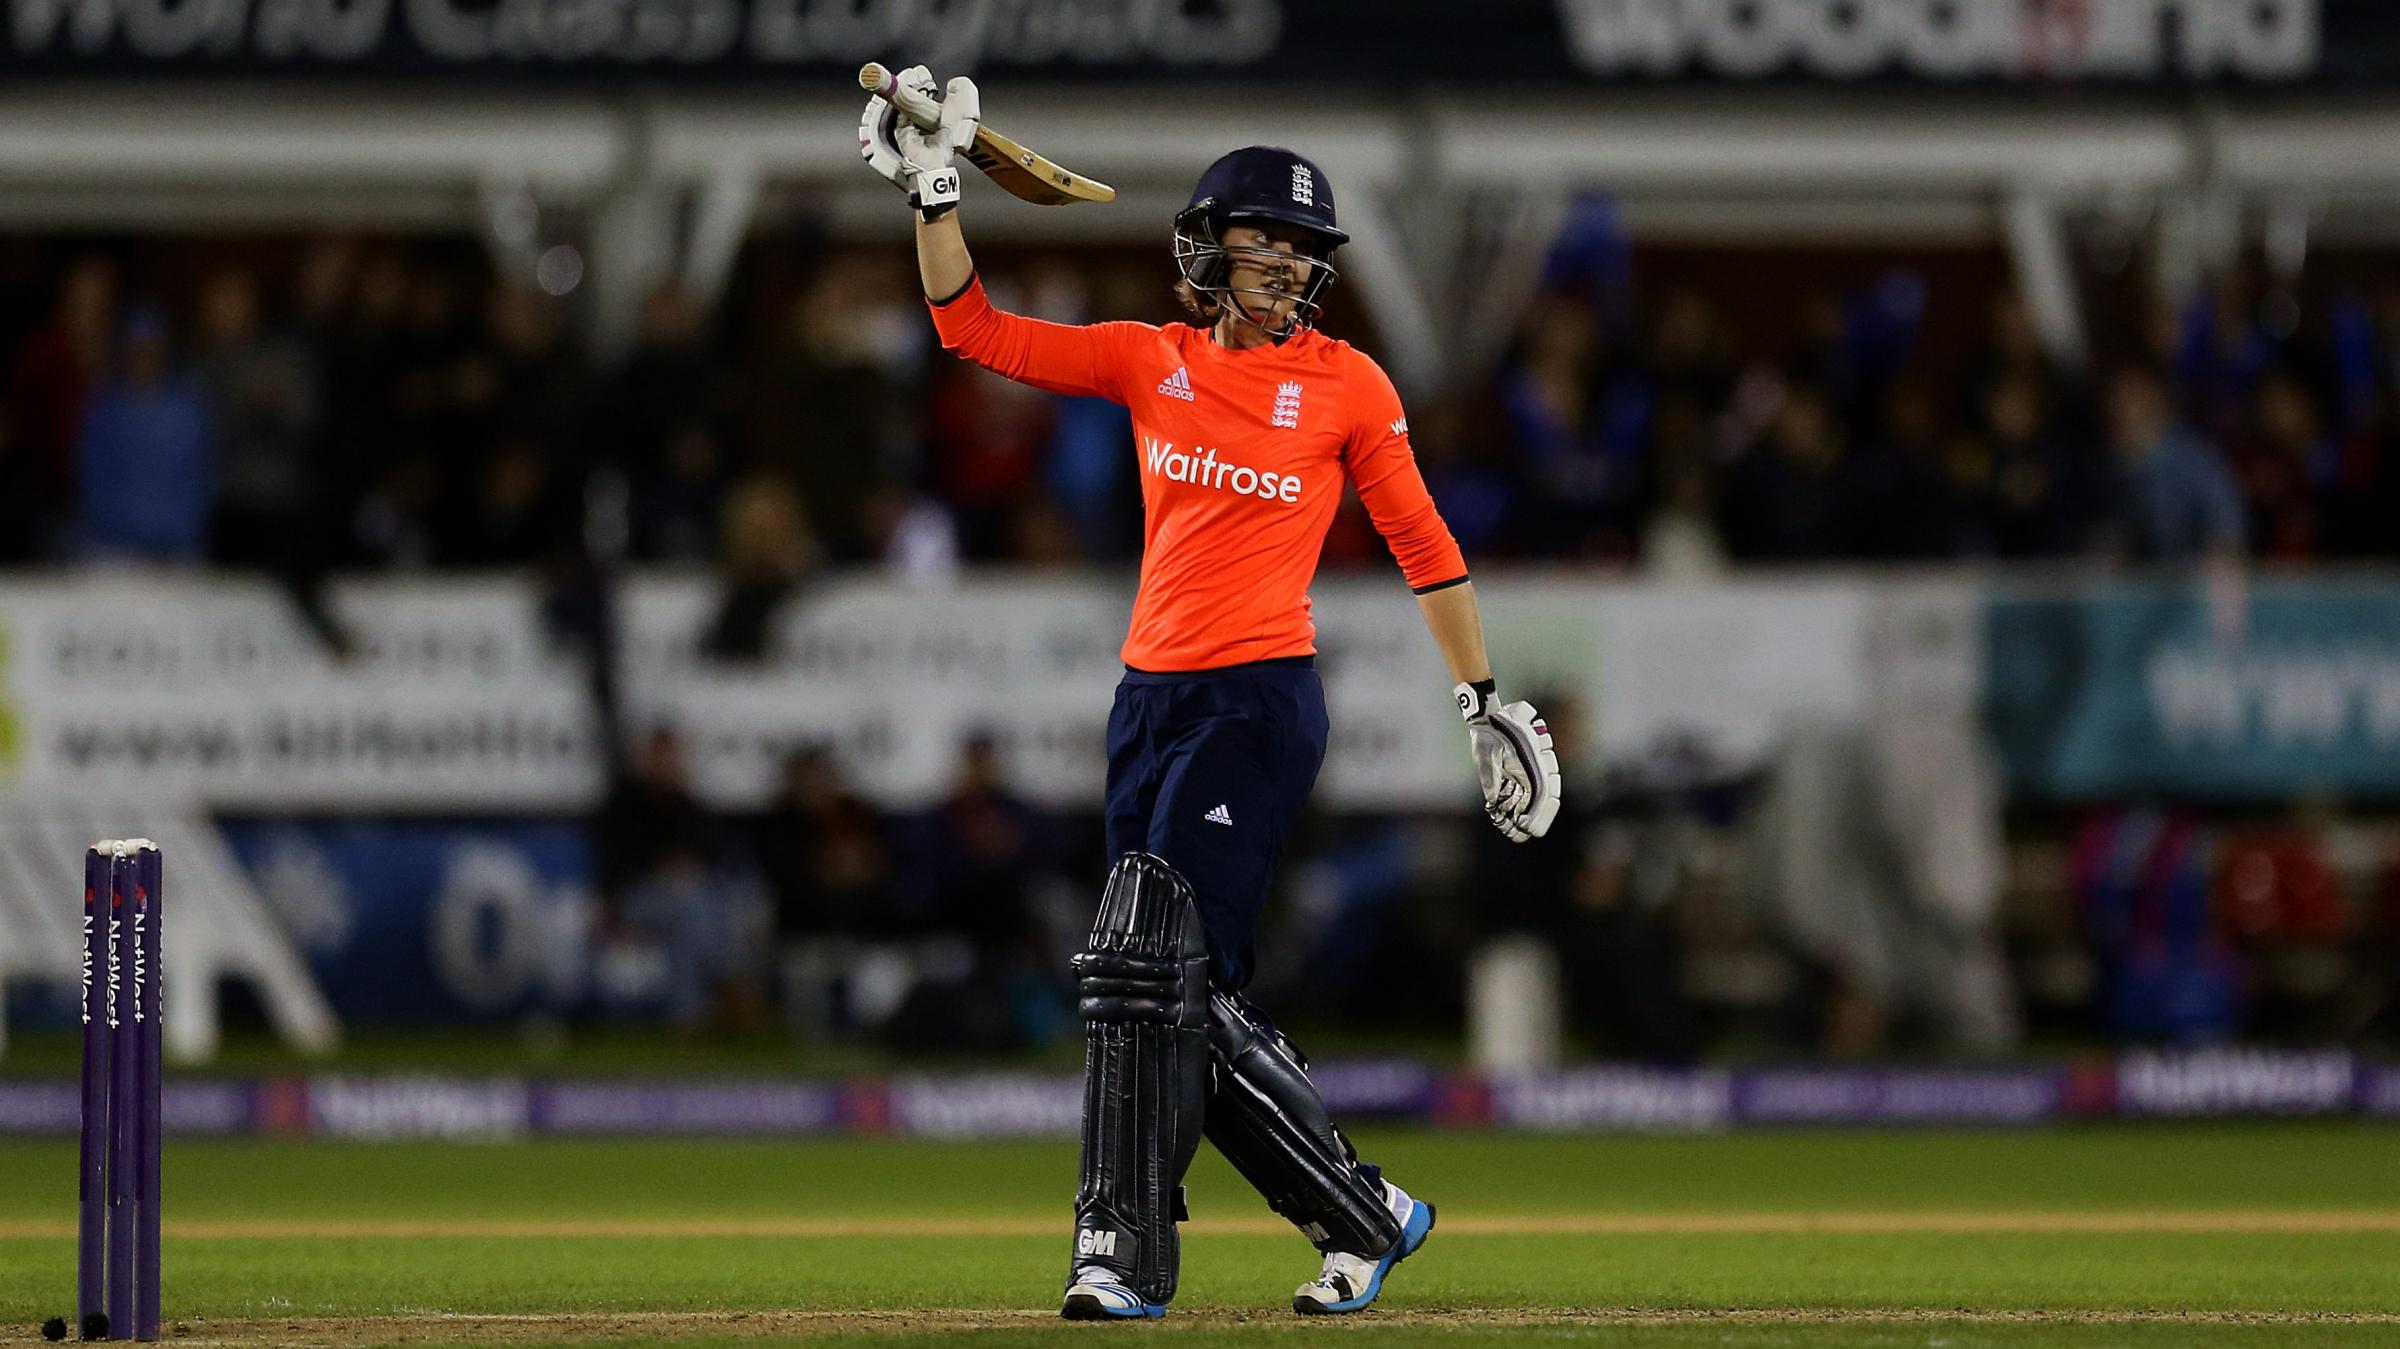 Sarah Taylor returns to England squad for World Cup - Wiltshire Times